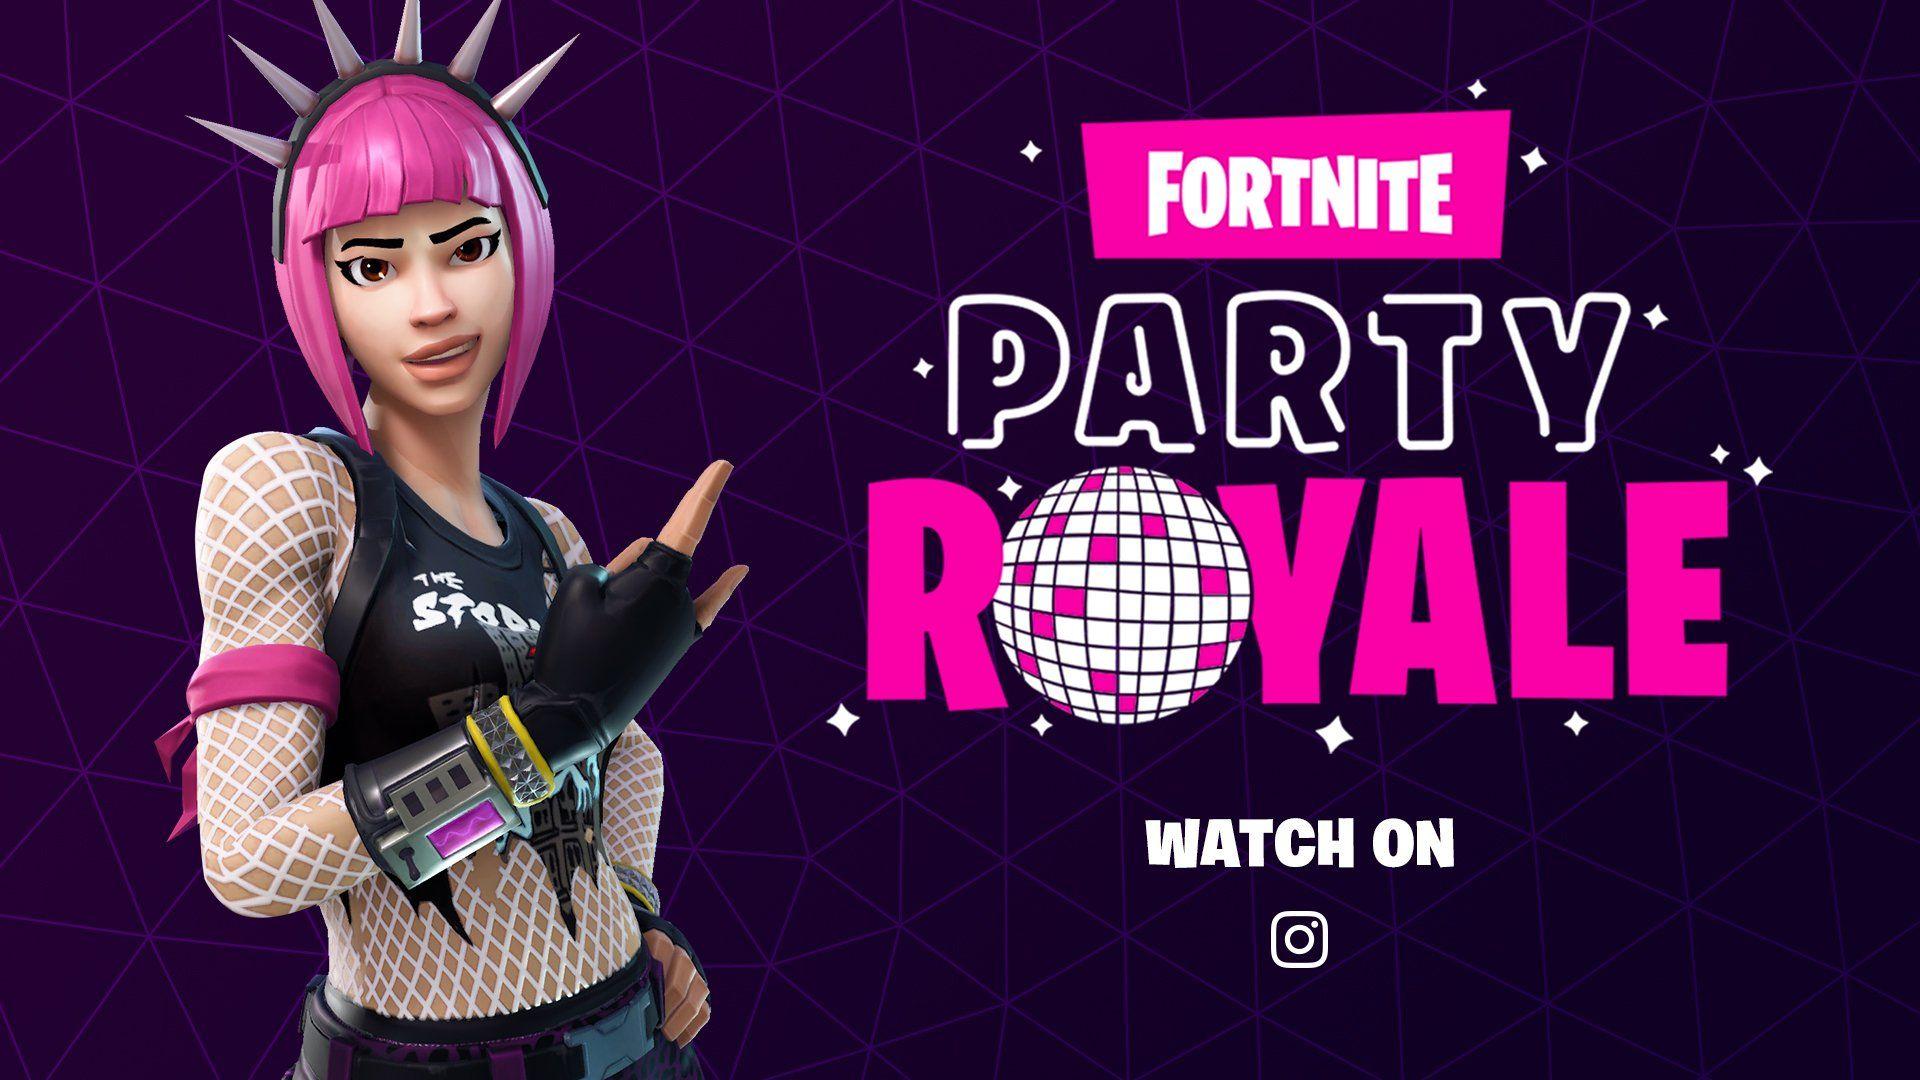 Fortnite are kicking off at the #PartyRoyale